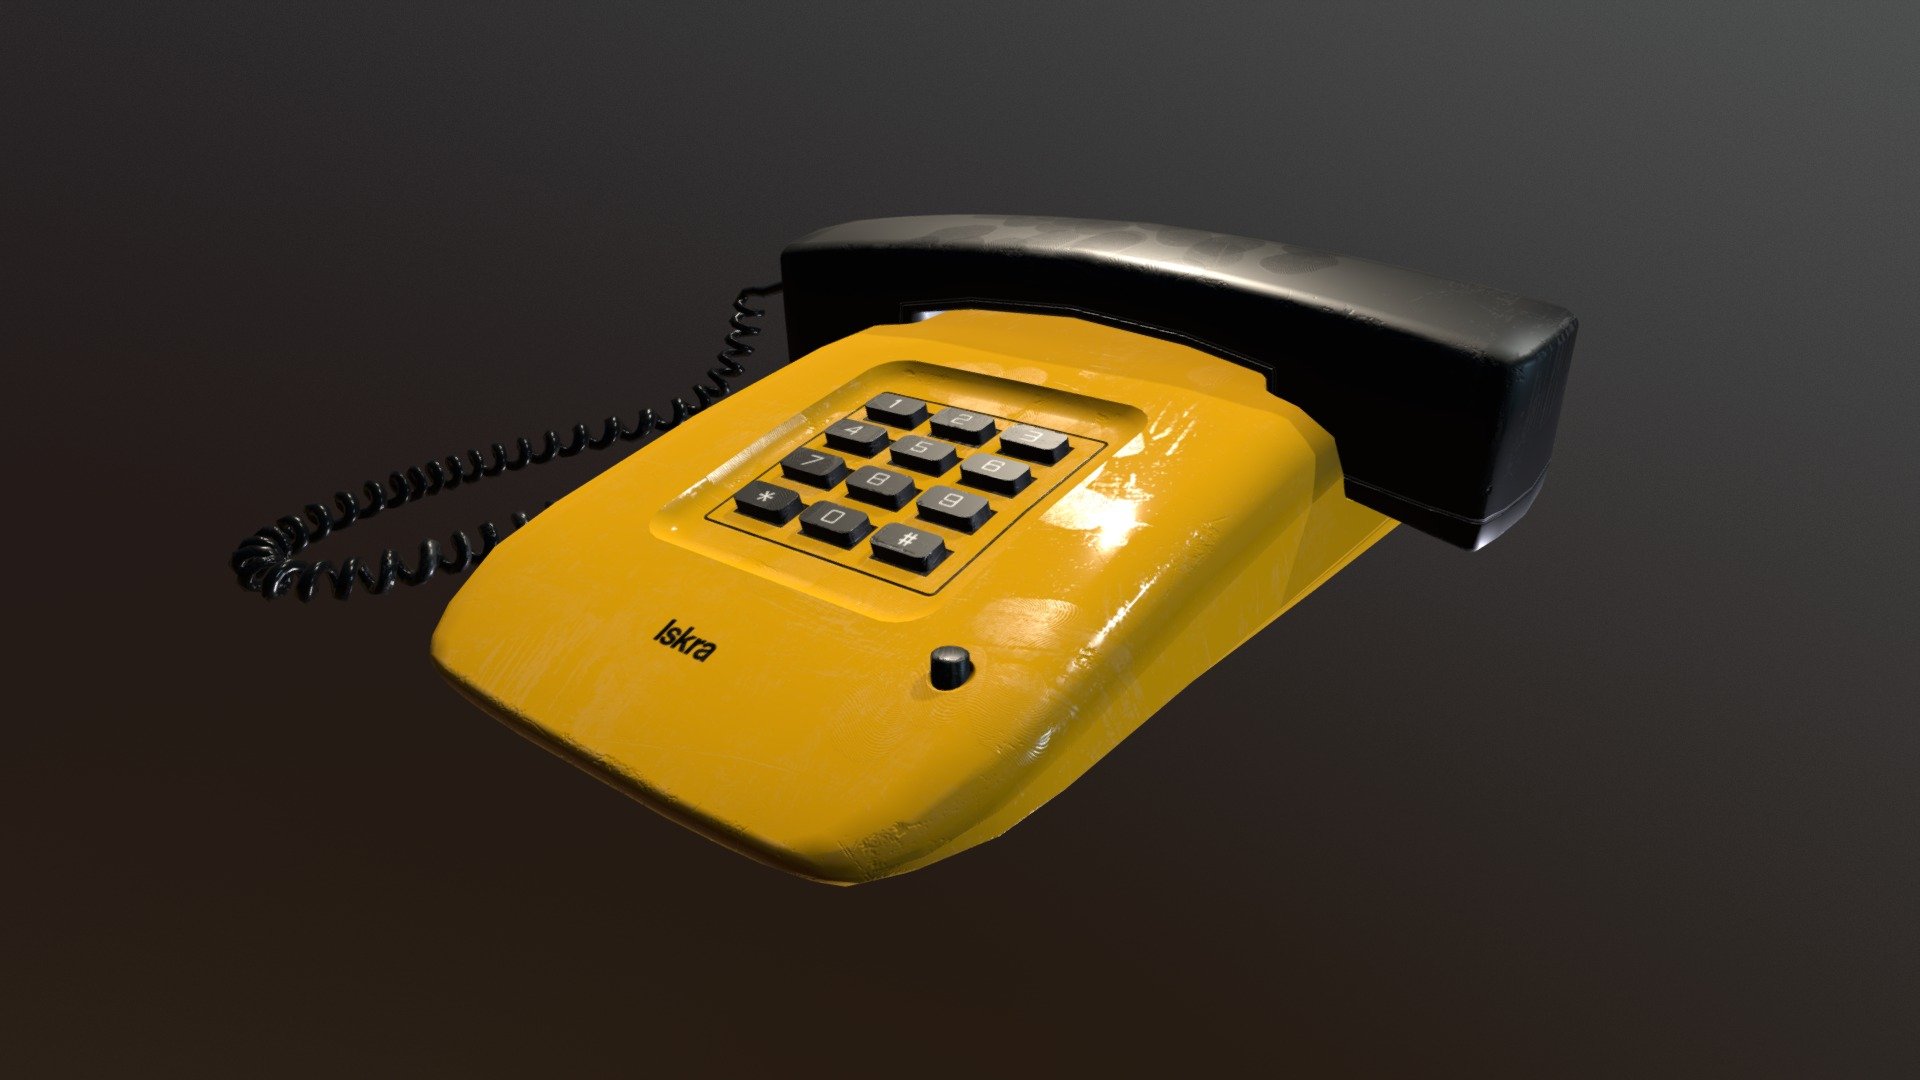 Vintage telephone Iskra ETA 85 from former Yugoslavia.

Made in 3ds Max 2016.

Textured in Substance Painter 3d model